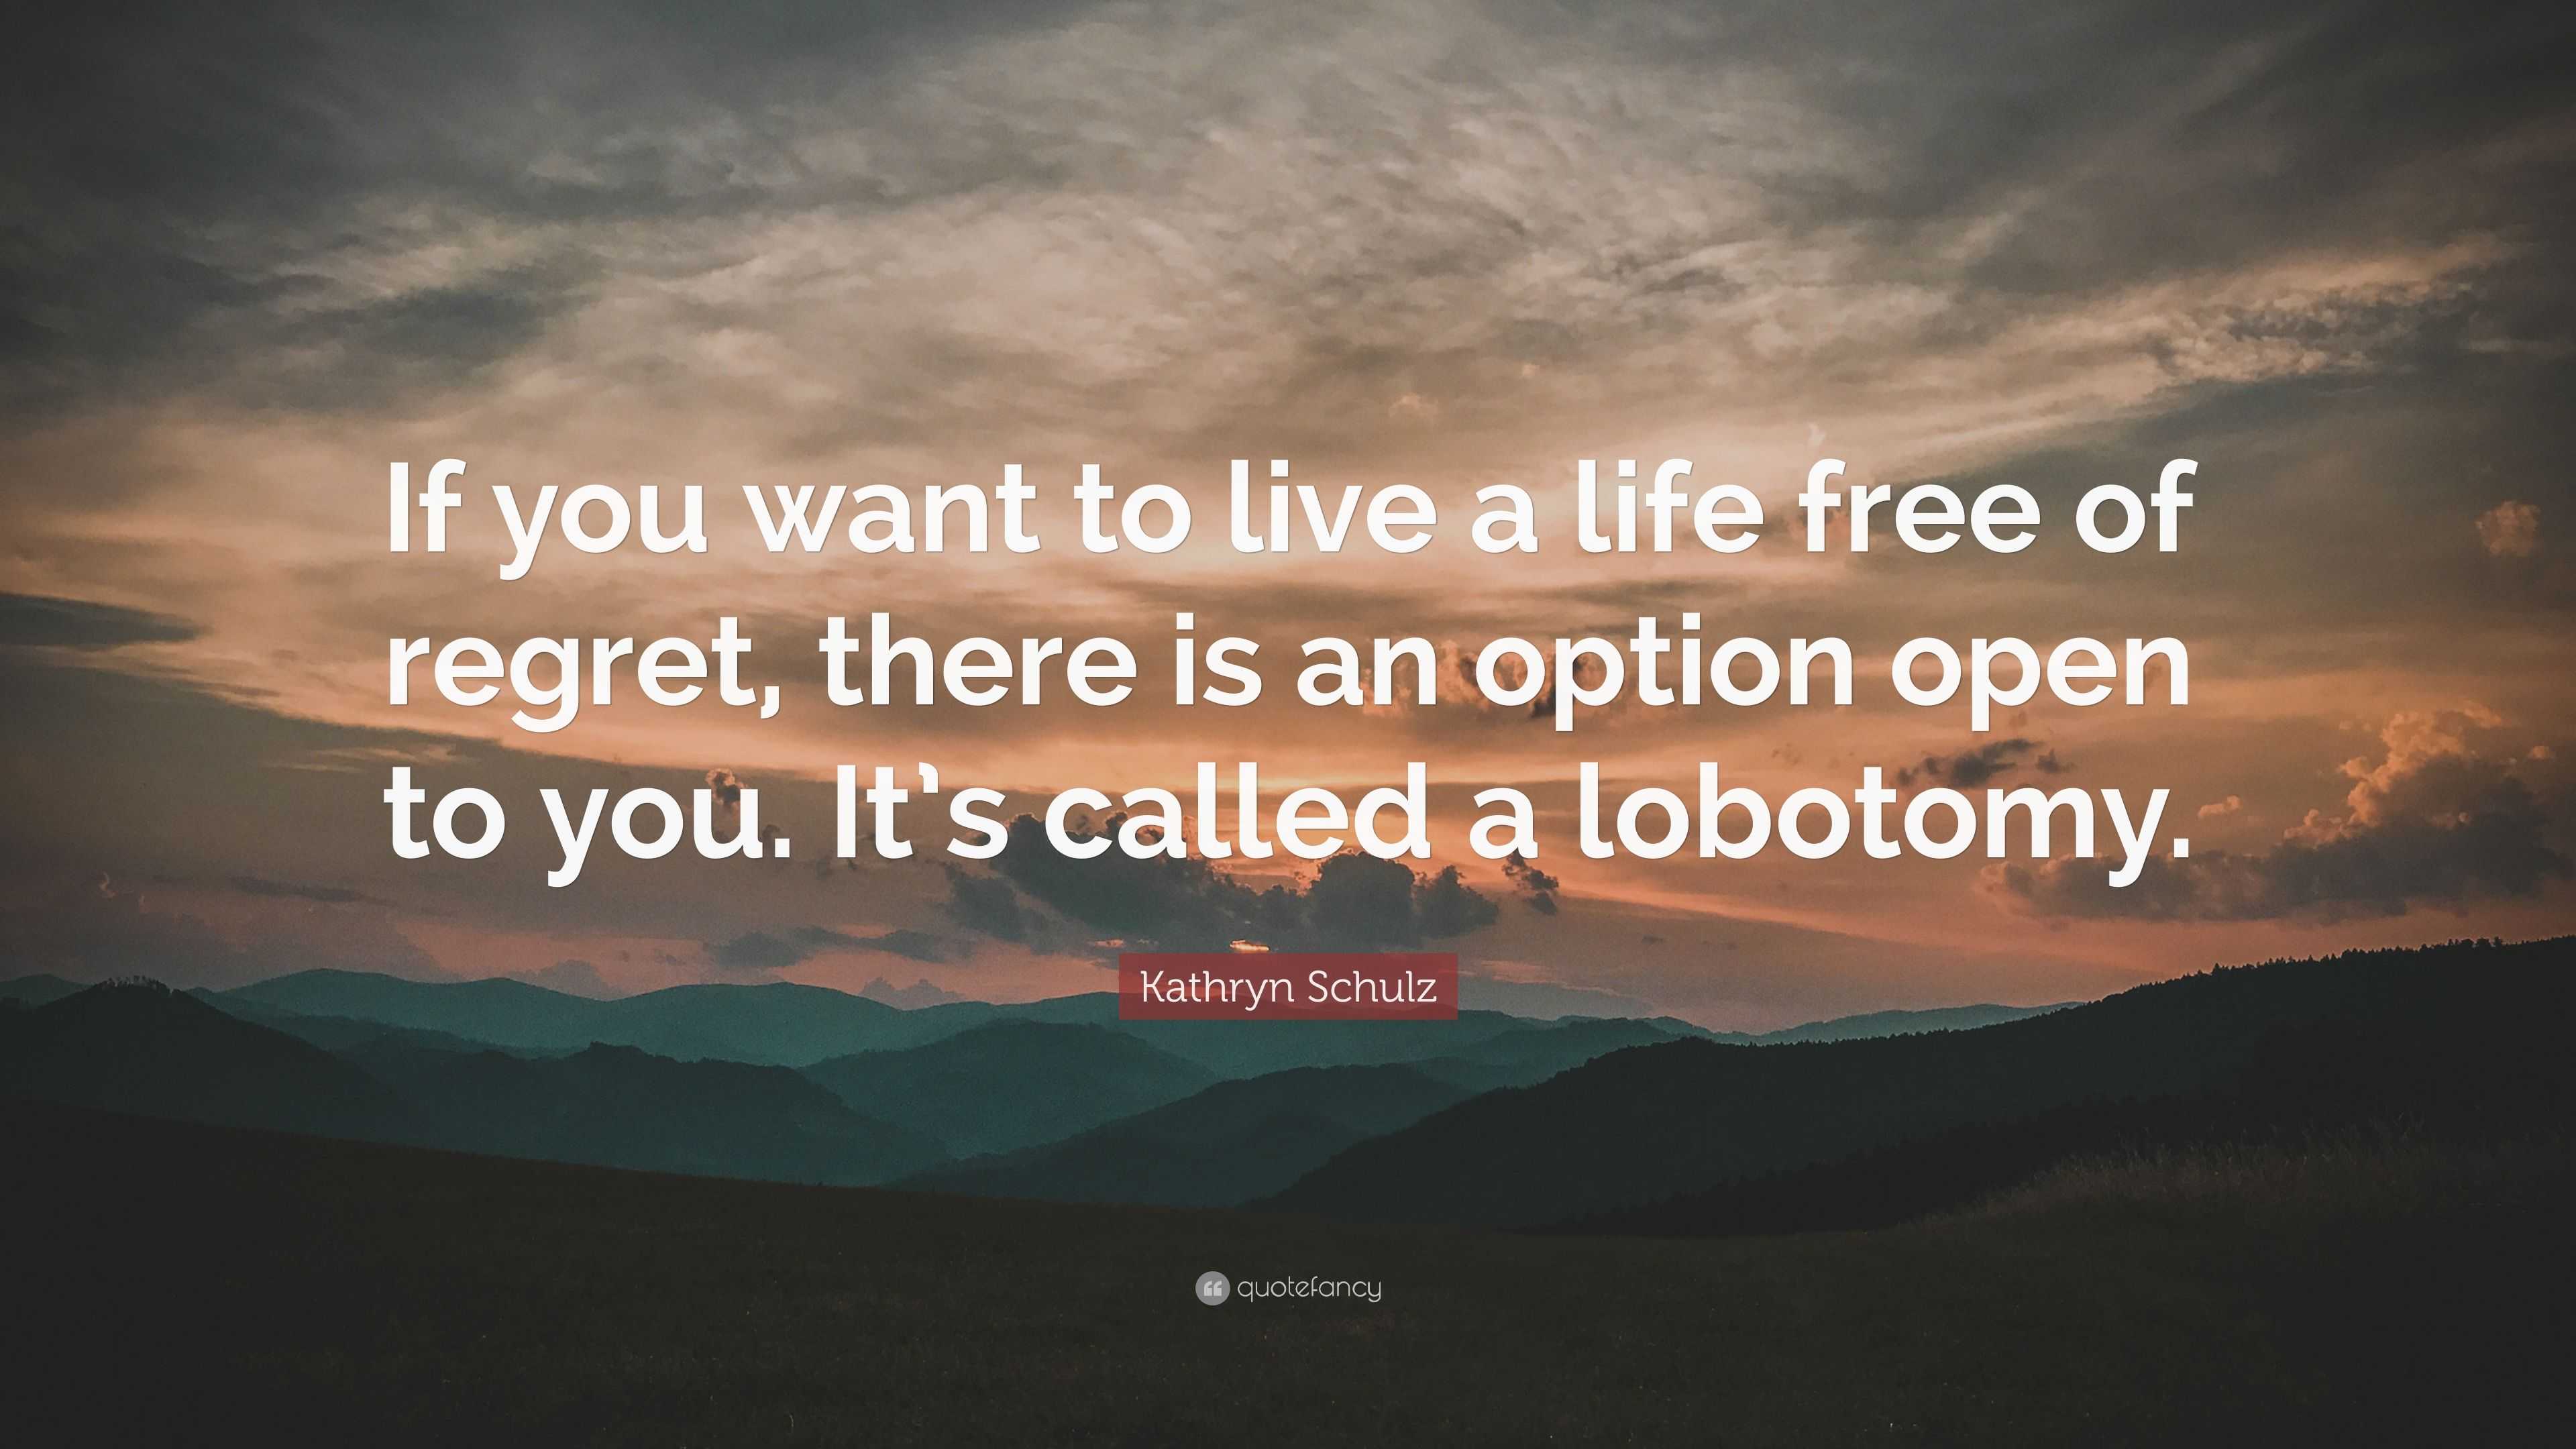 Kathryn Schulz Quote “If you want to live a life free of regret